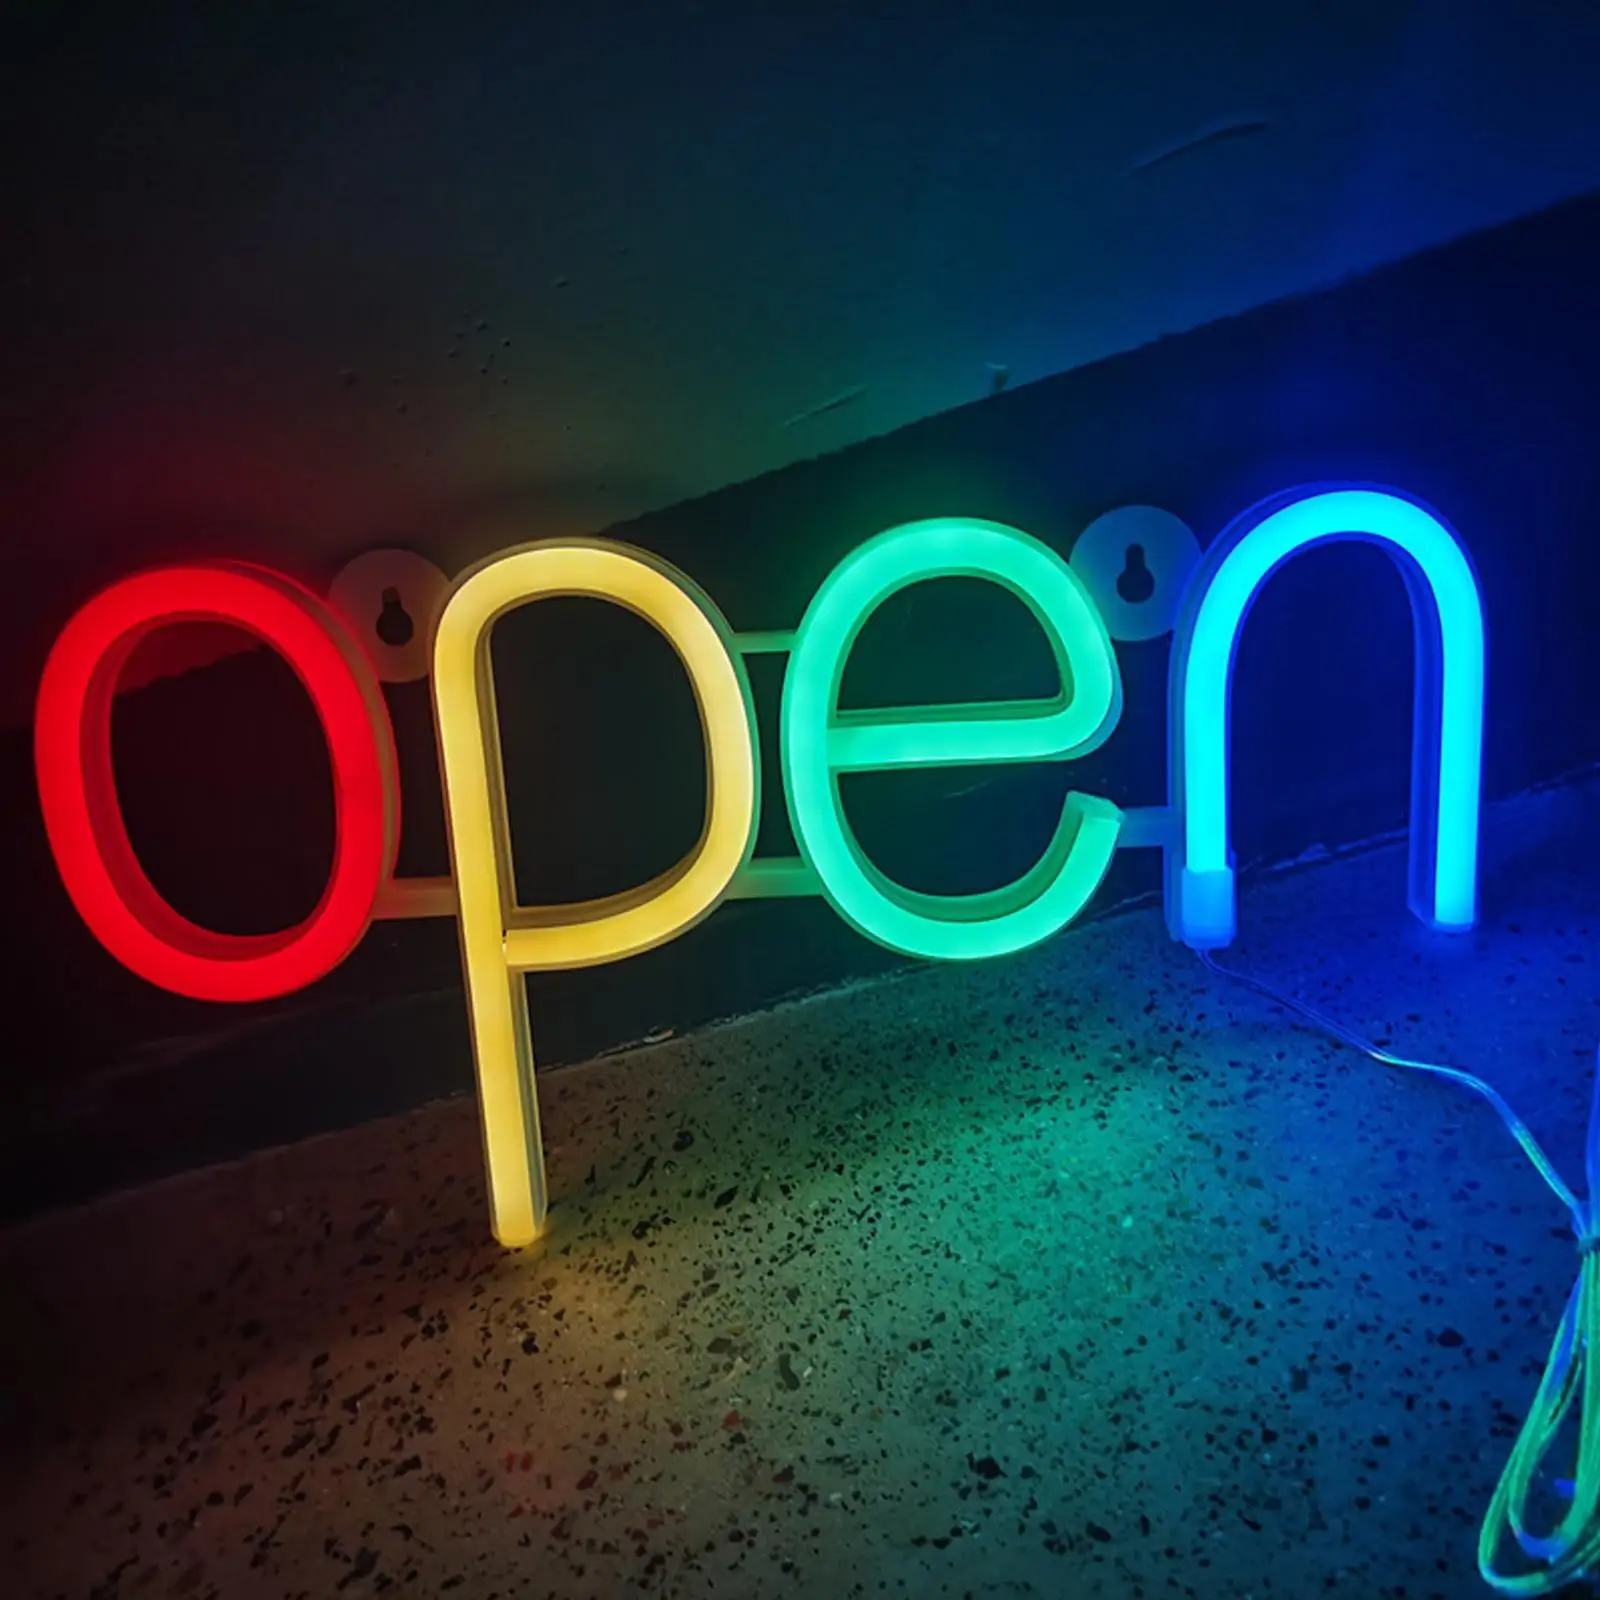 LED Open Sign Lighting Neon Lights Wall Hanging Bar Fixture Restaurant Lamp Battery Powered for Cafe Window Pub Bedroom Club